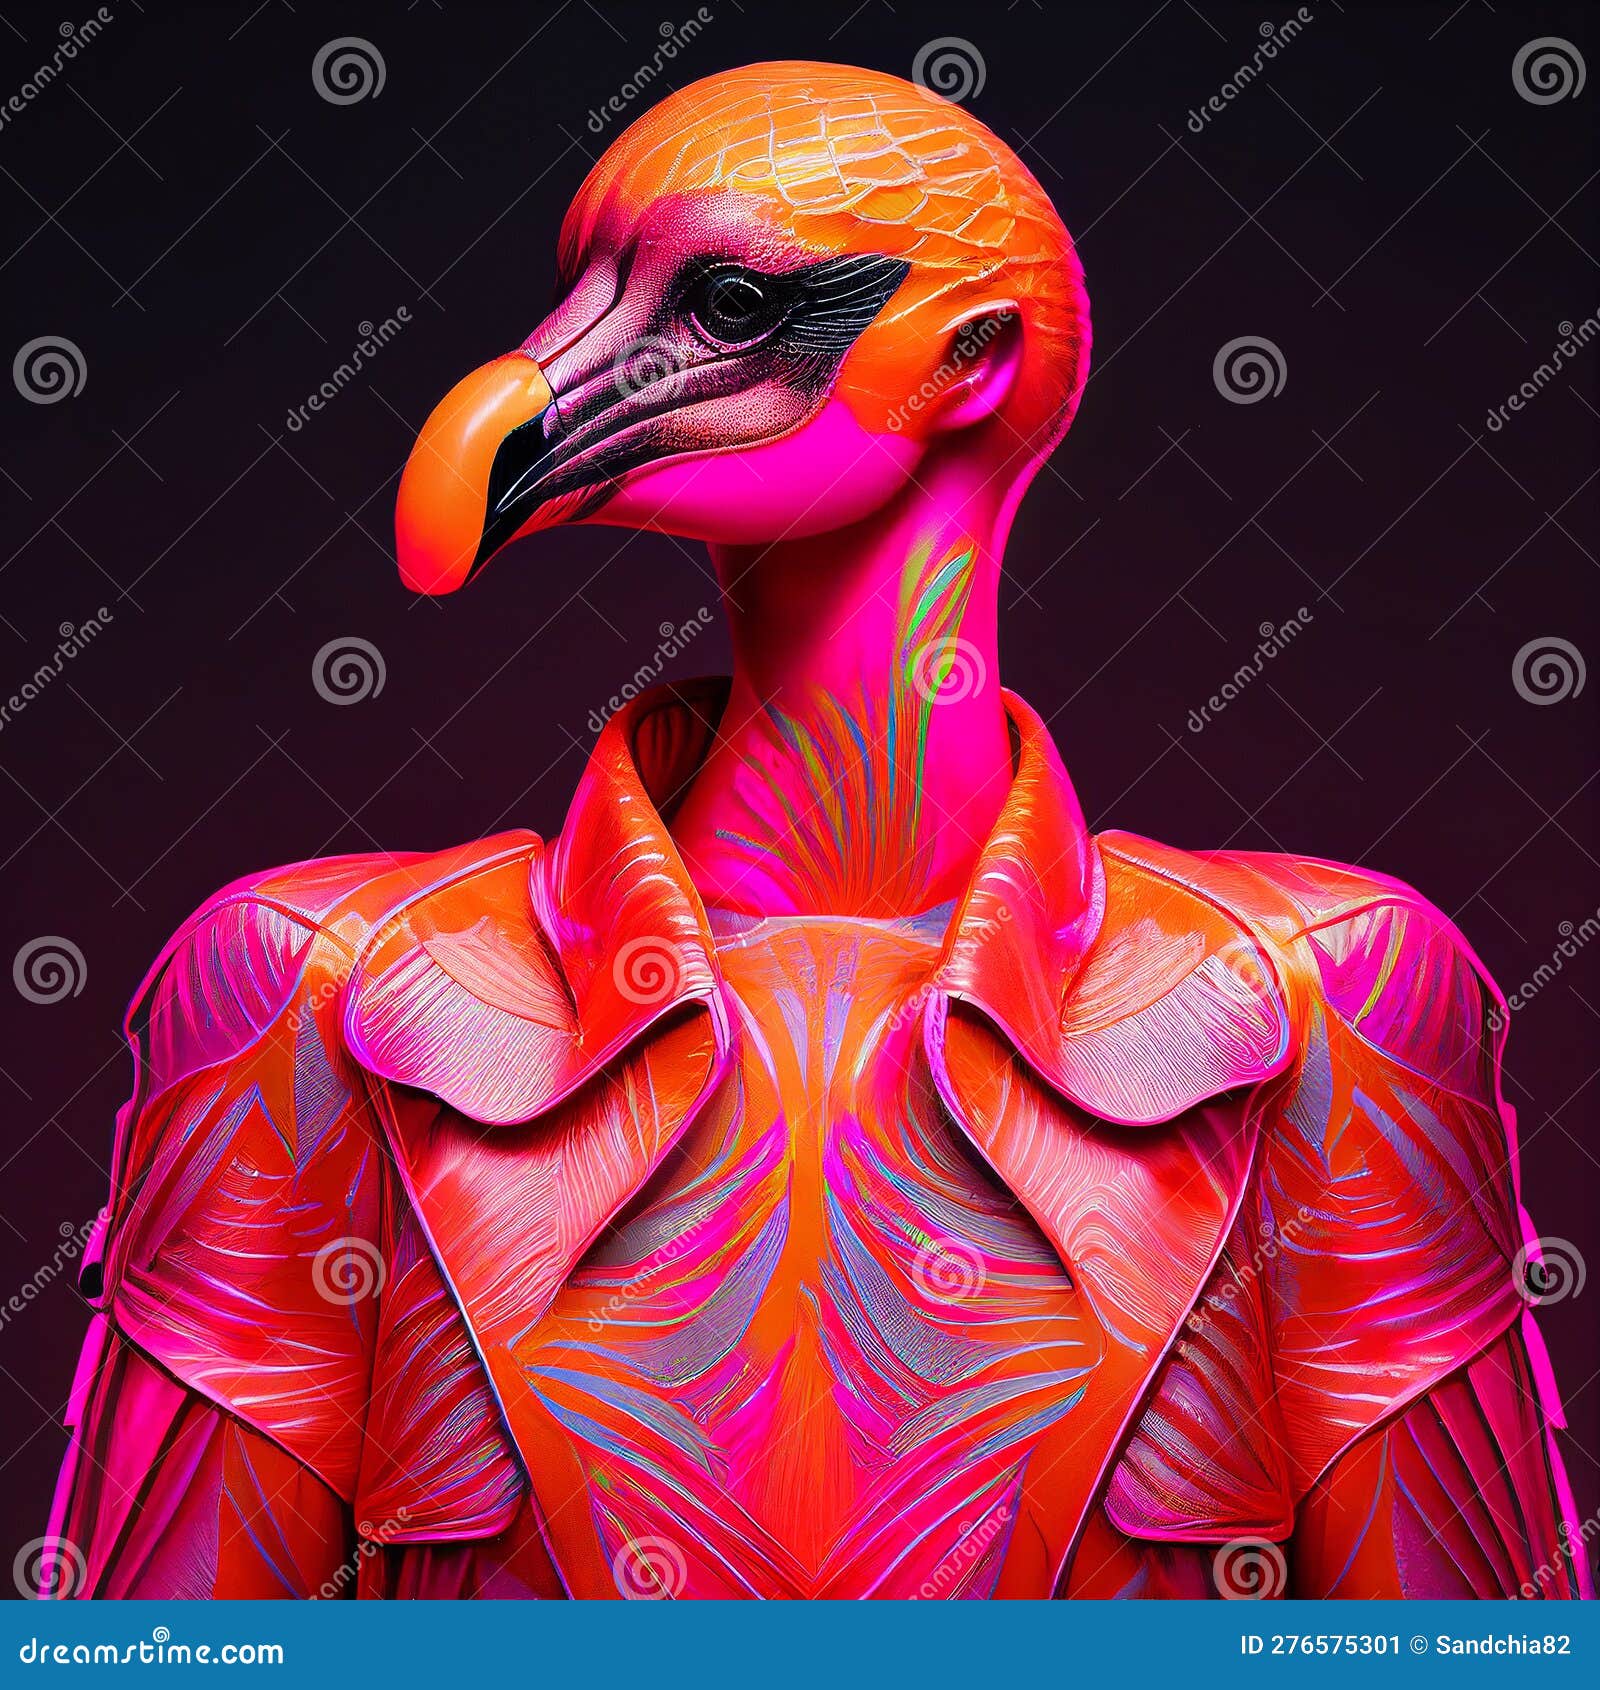 Realistic Lifelike Flamingo Bird In Fluorescent Electric Highlighters